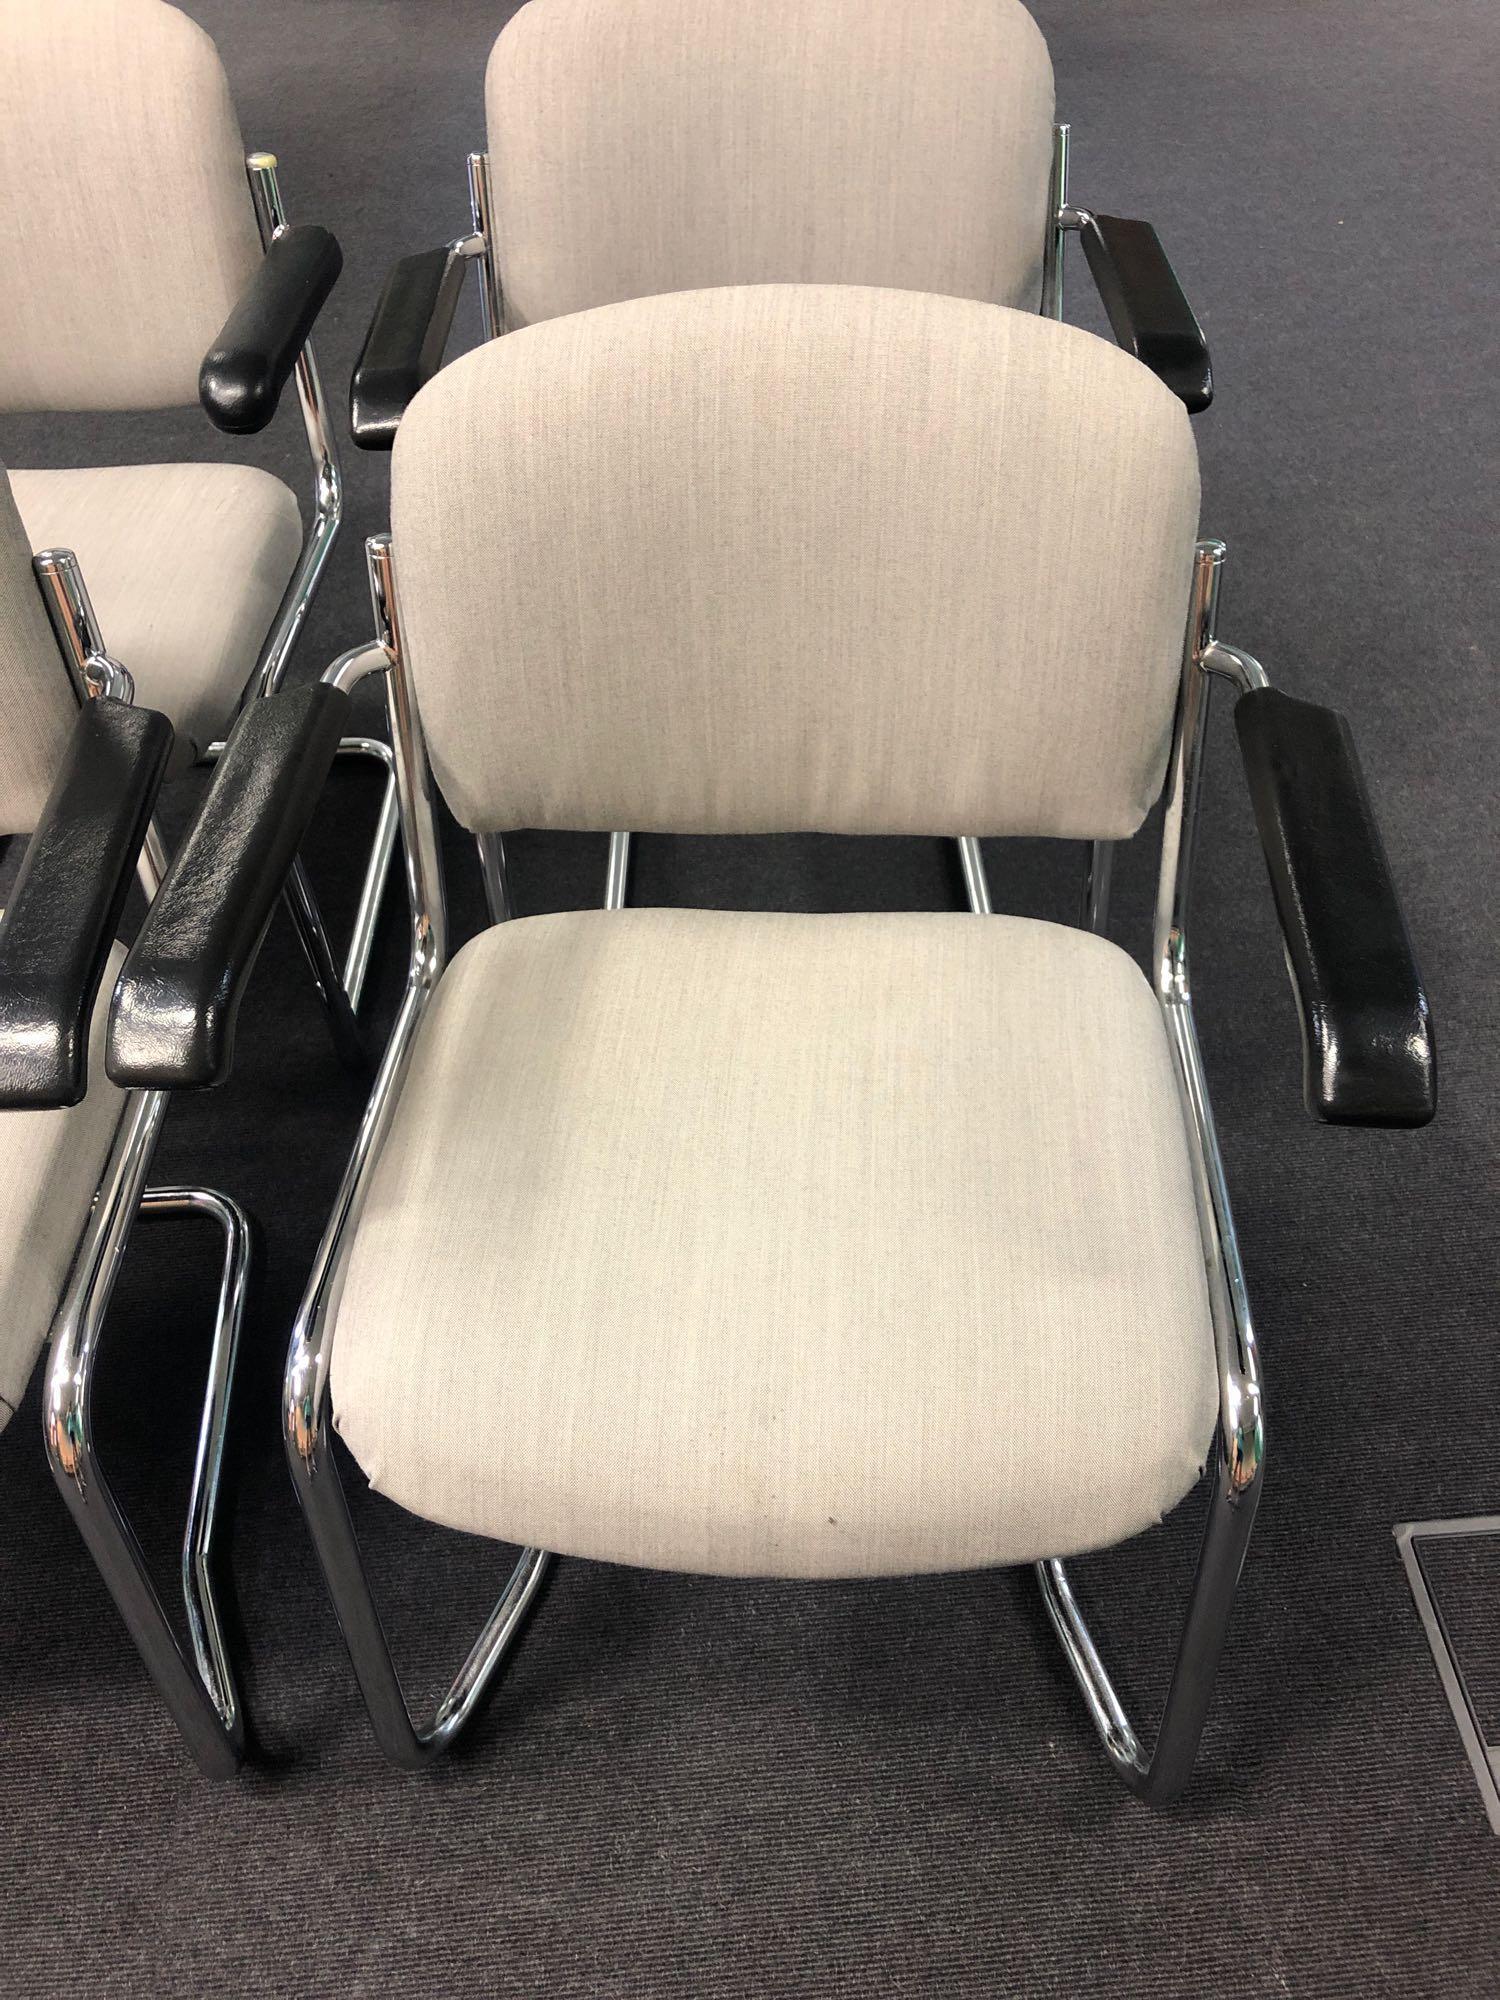 10x Burgess Grey Cantilever Chairs - Image 2 of 2